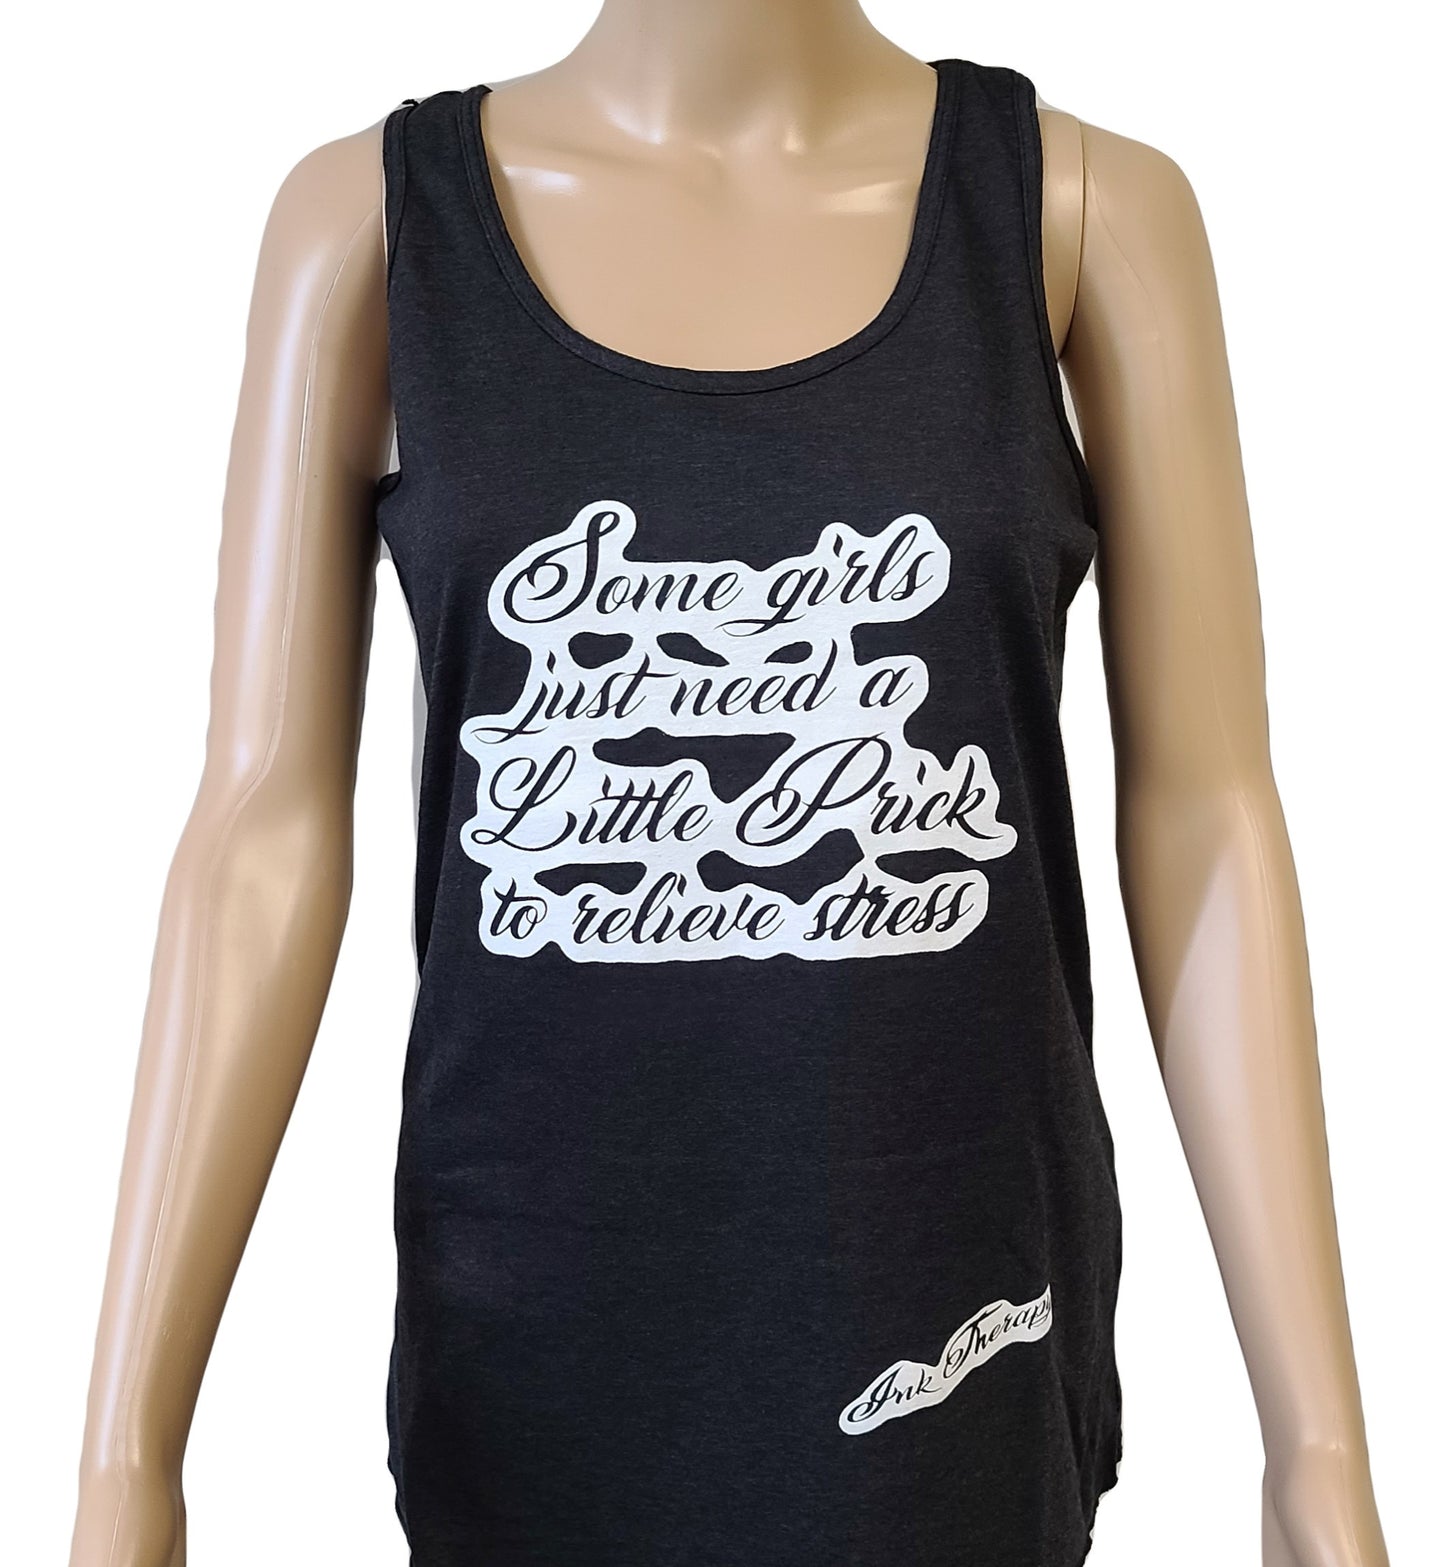 "Some Girls Just Need a Little Prick" Tank Top